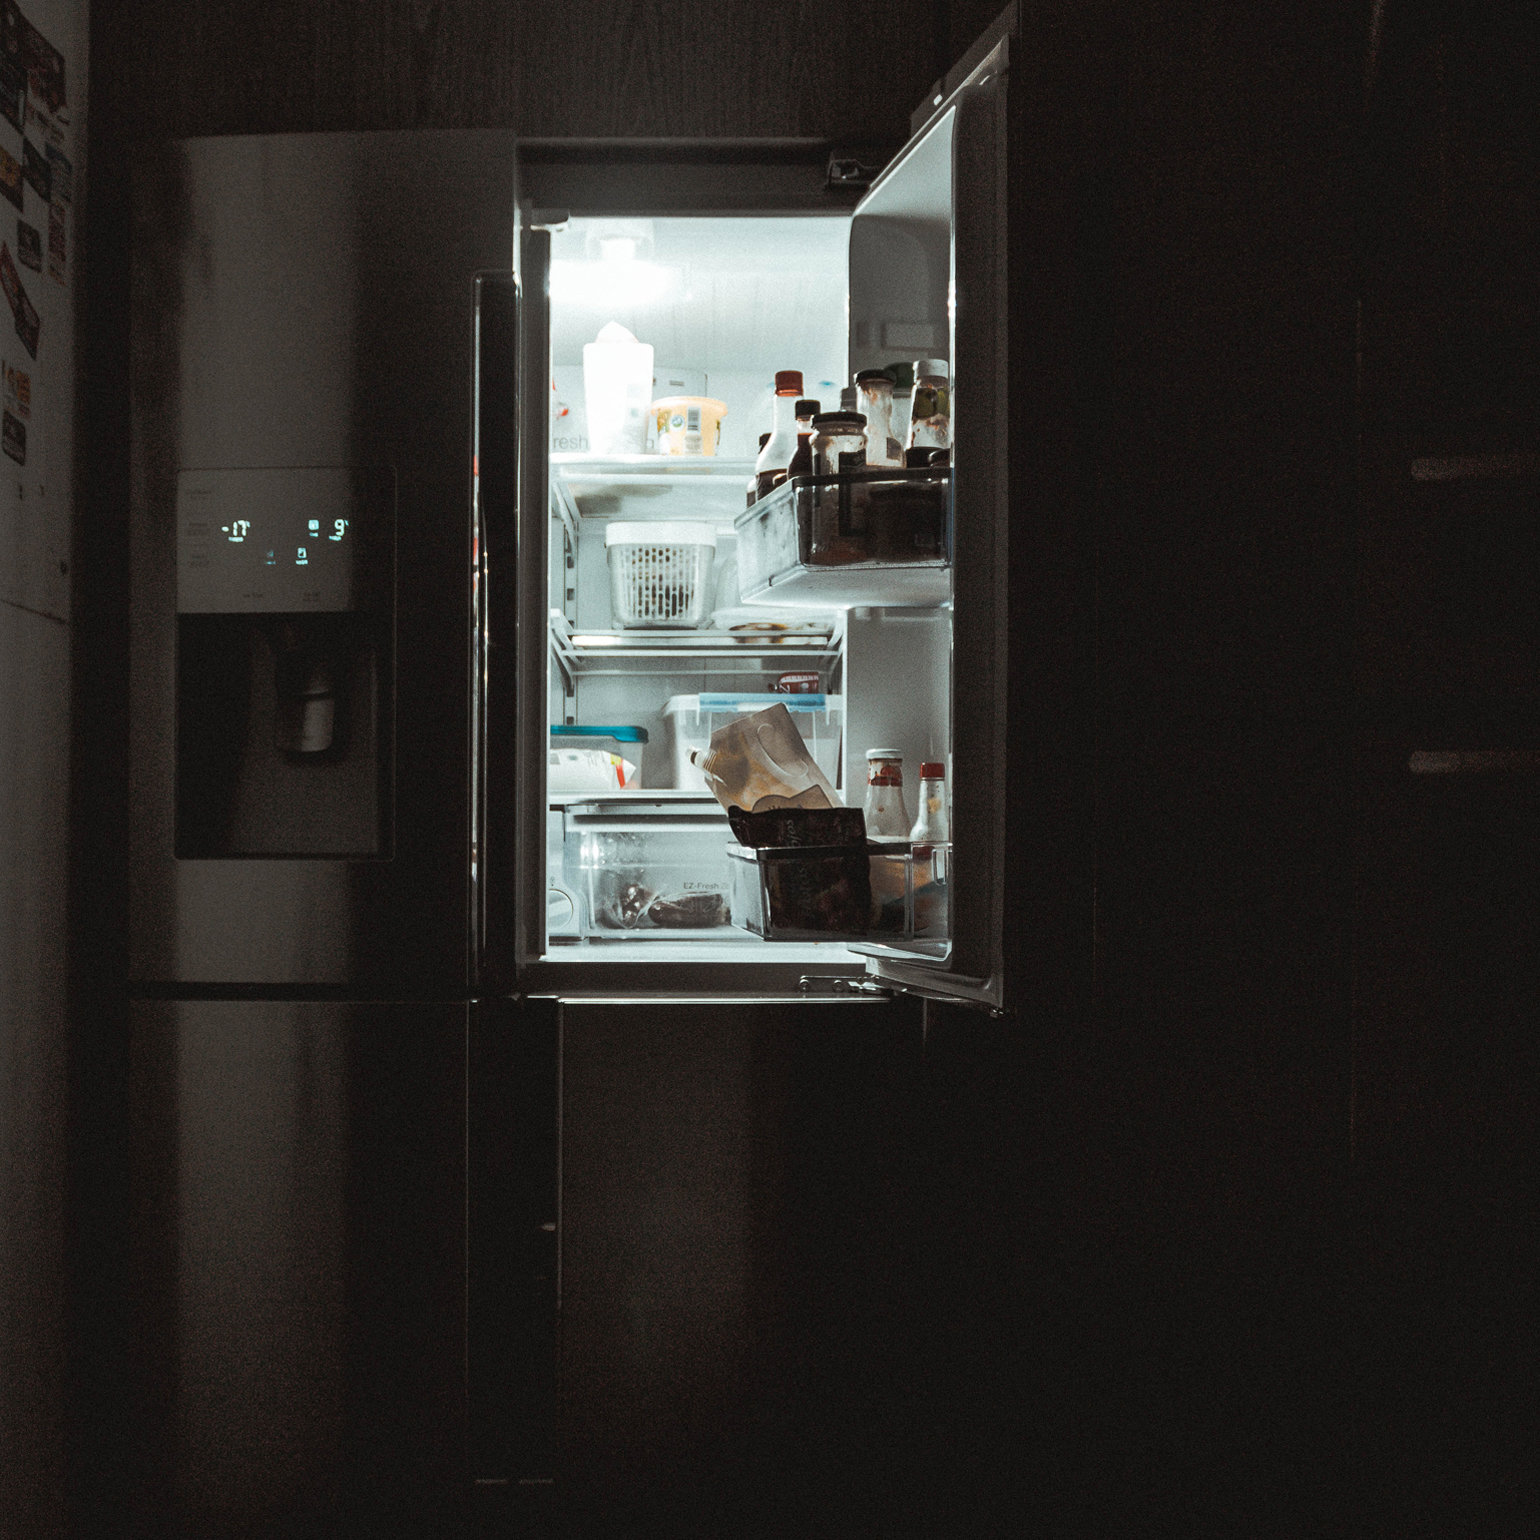 A dark room with an open fridge, so the light of the firdge is all you can see. The fridge has food and bottles in it